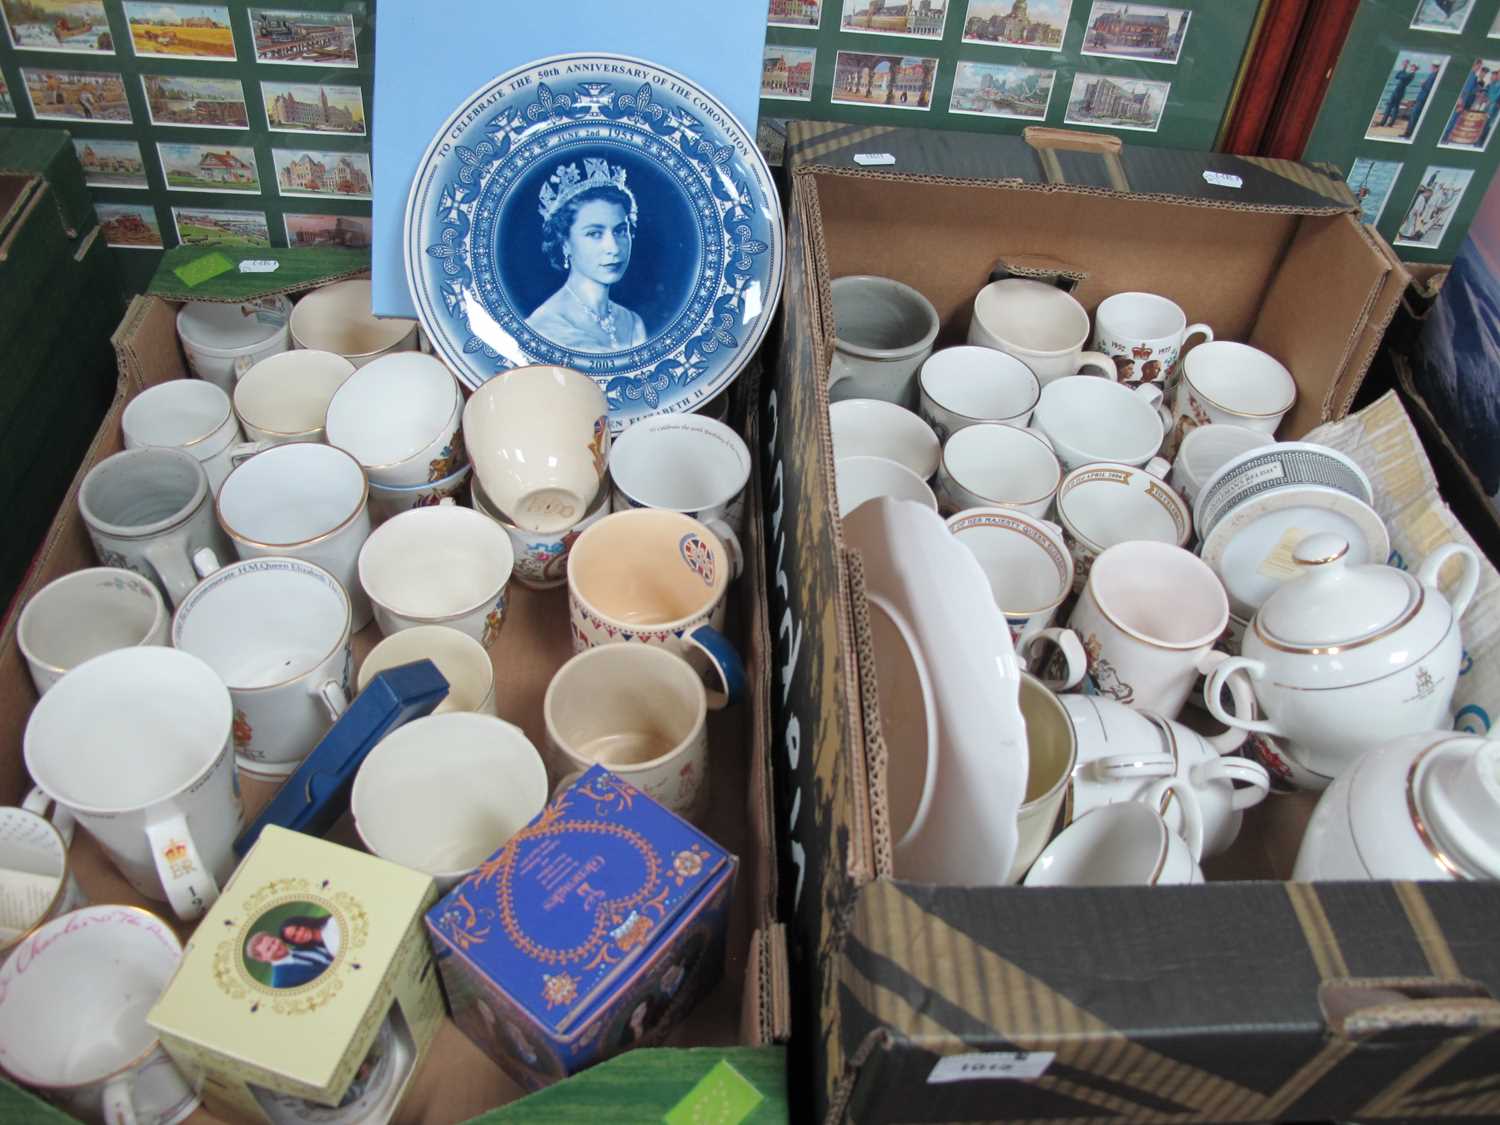 A Collection of Royal Commemorative Mugs, Queen Victoria to present day, plus a QEII commemorative